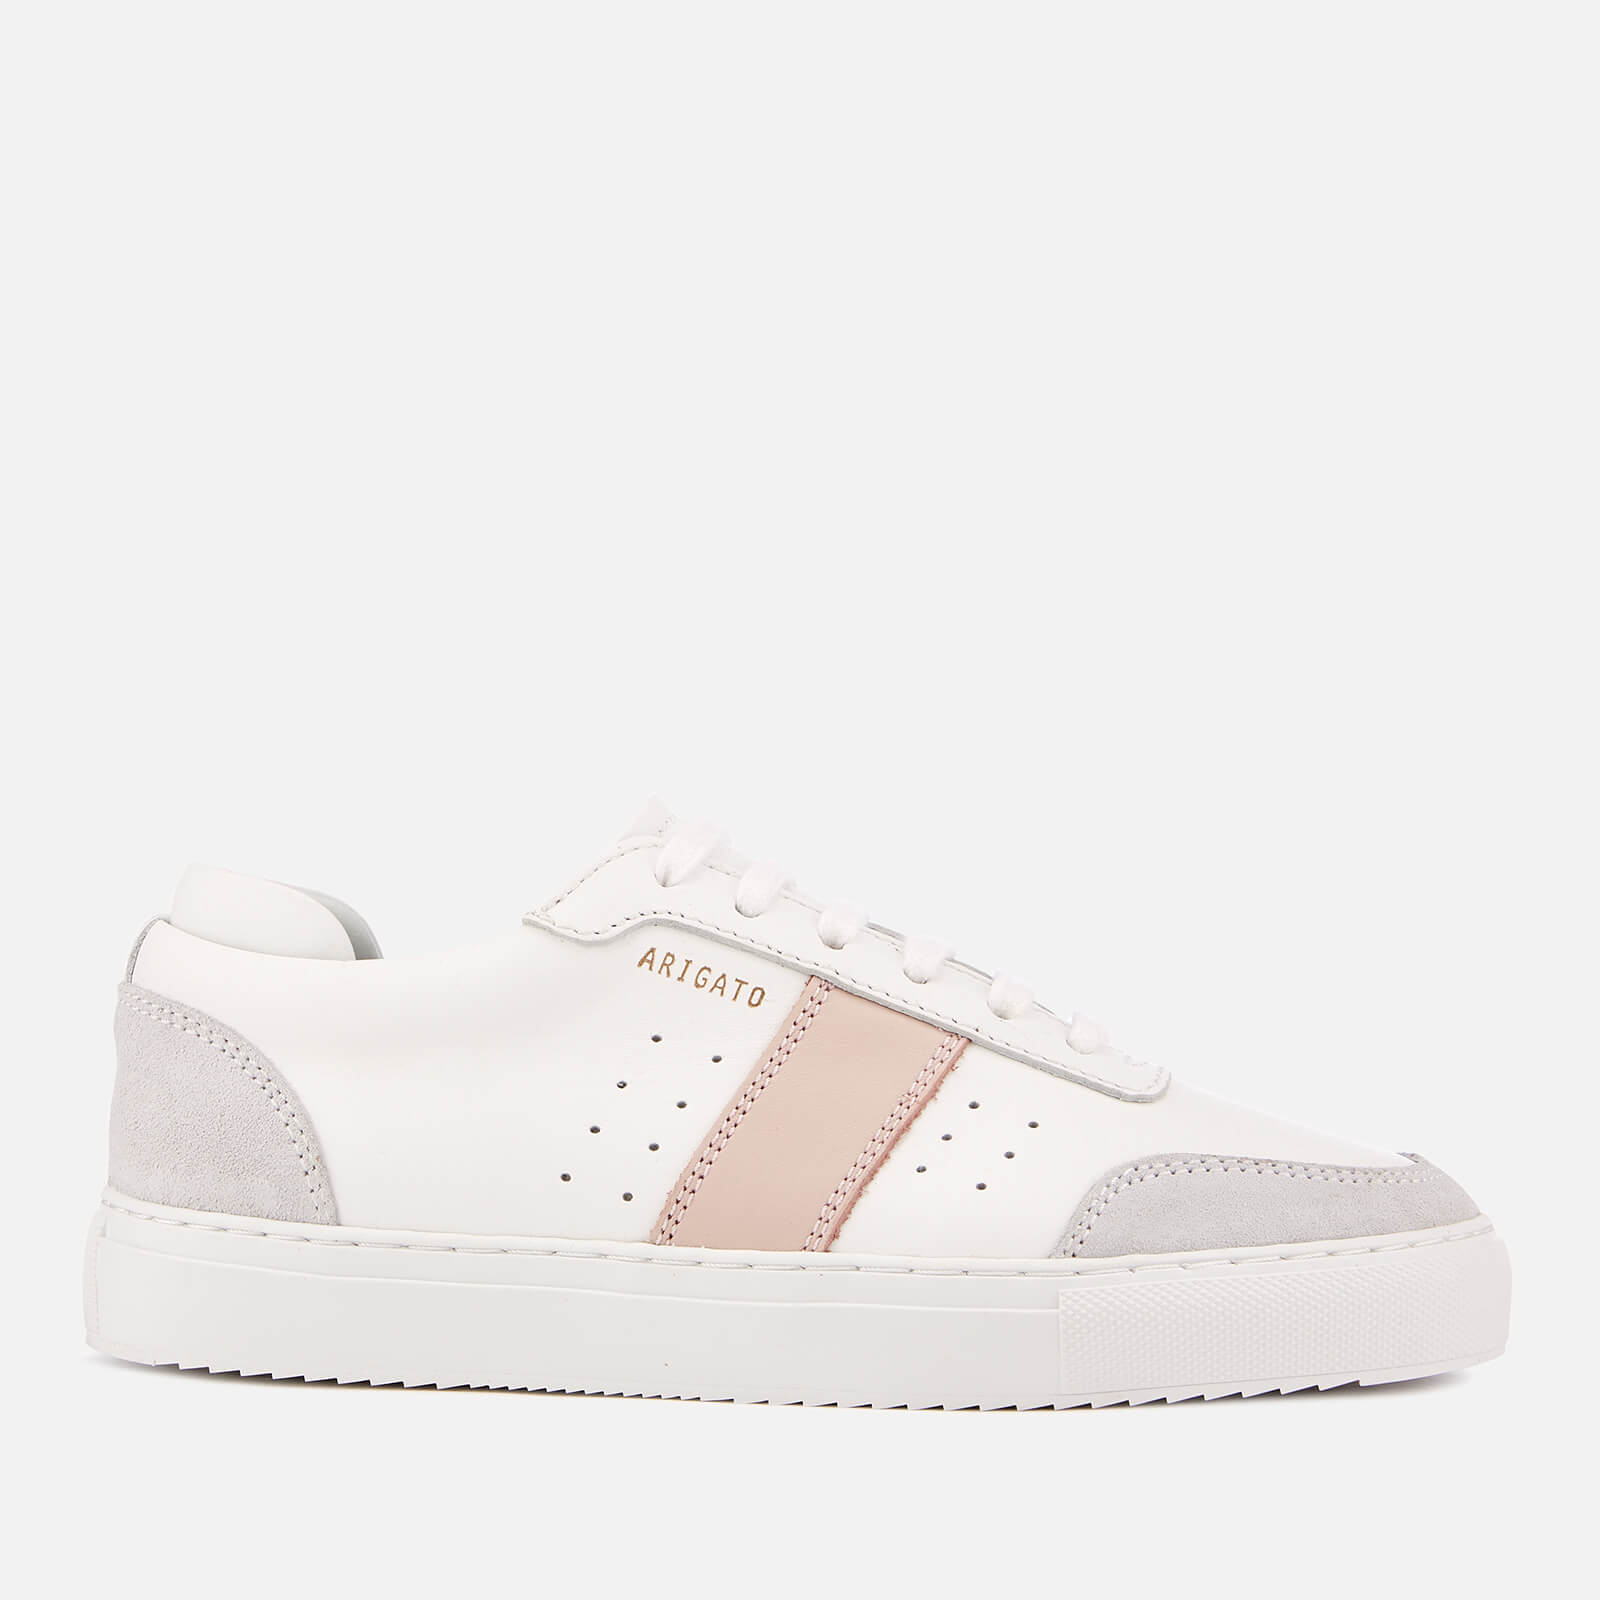 Dunk Leather Trainers - White/Pink 